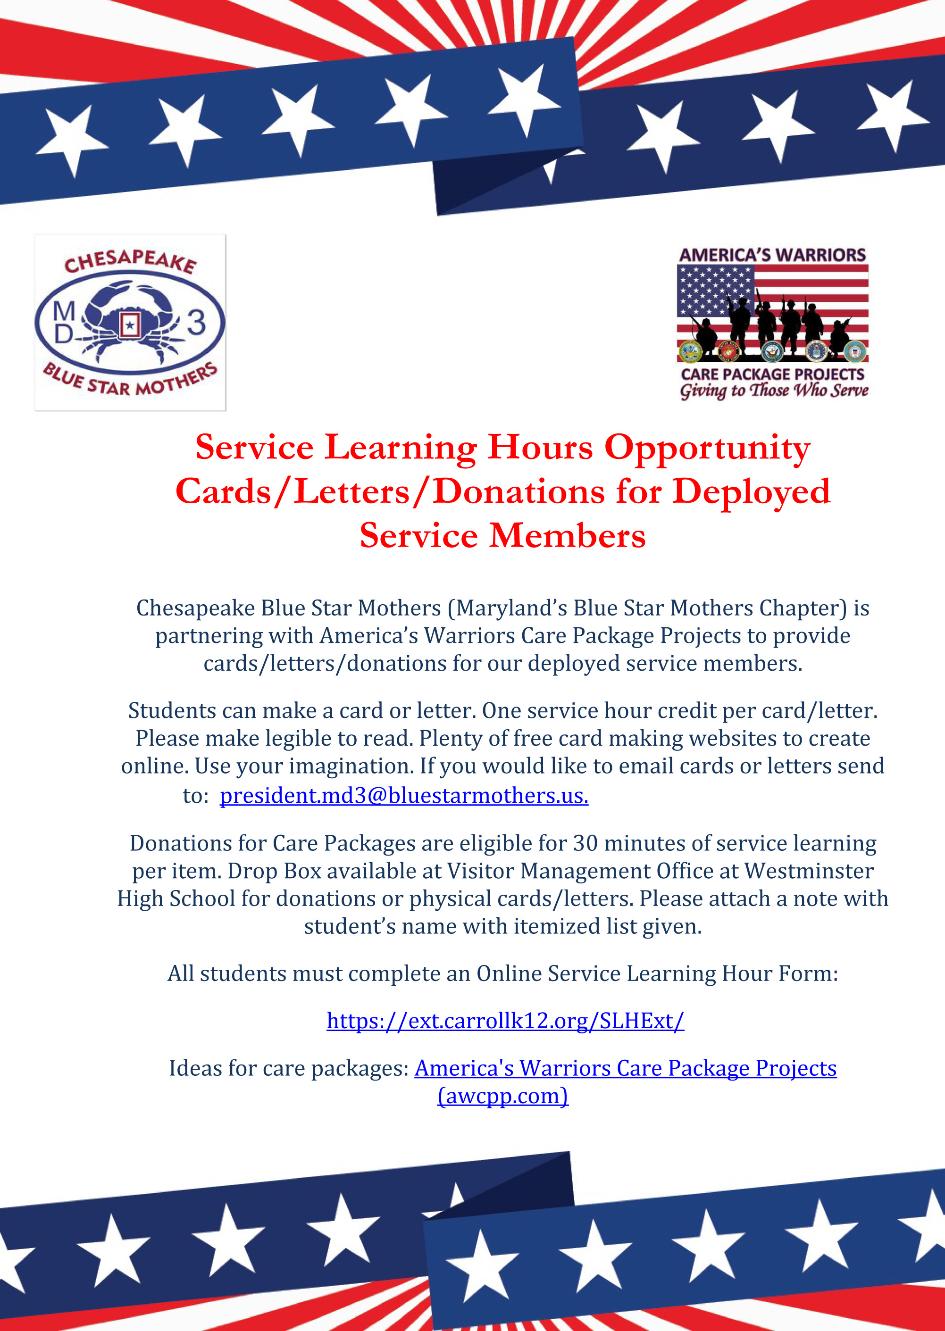 America's Warriors Care Package Projects